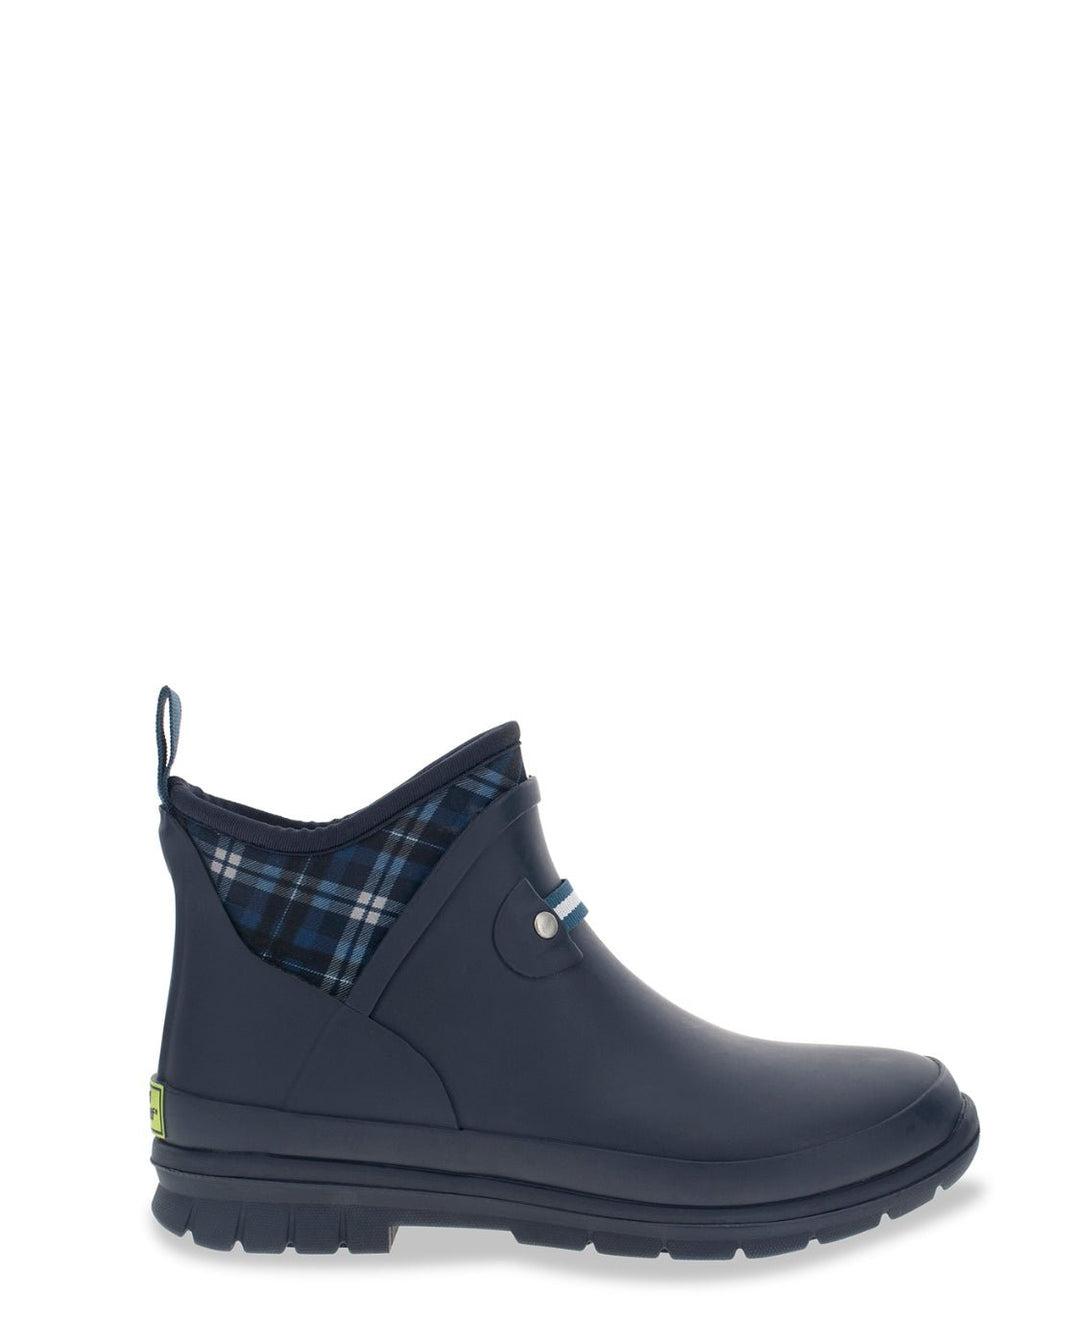 Women's Instorm Ankle Rain Boot - Navy - Western Chief